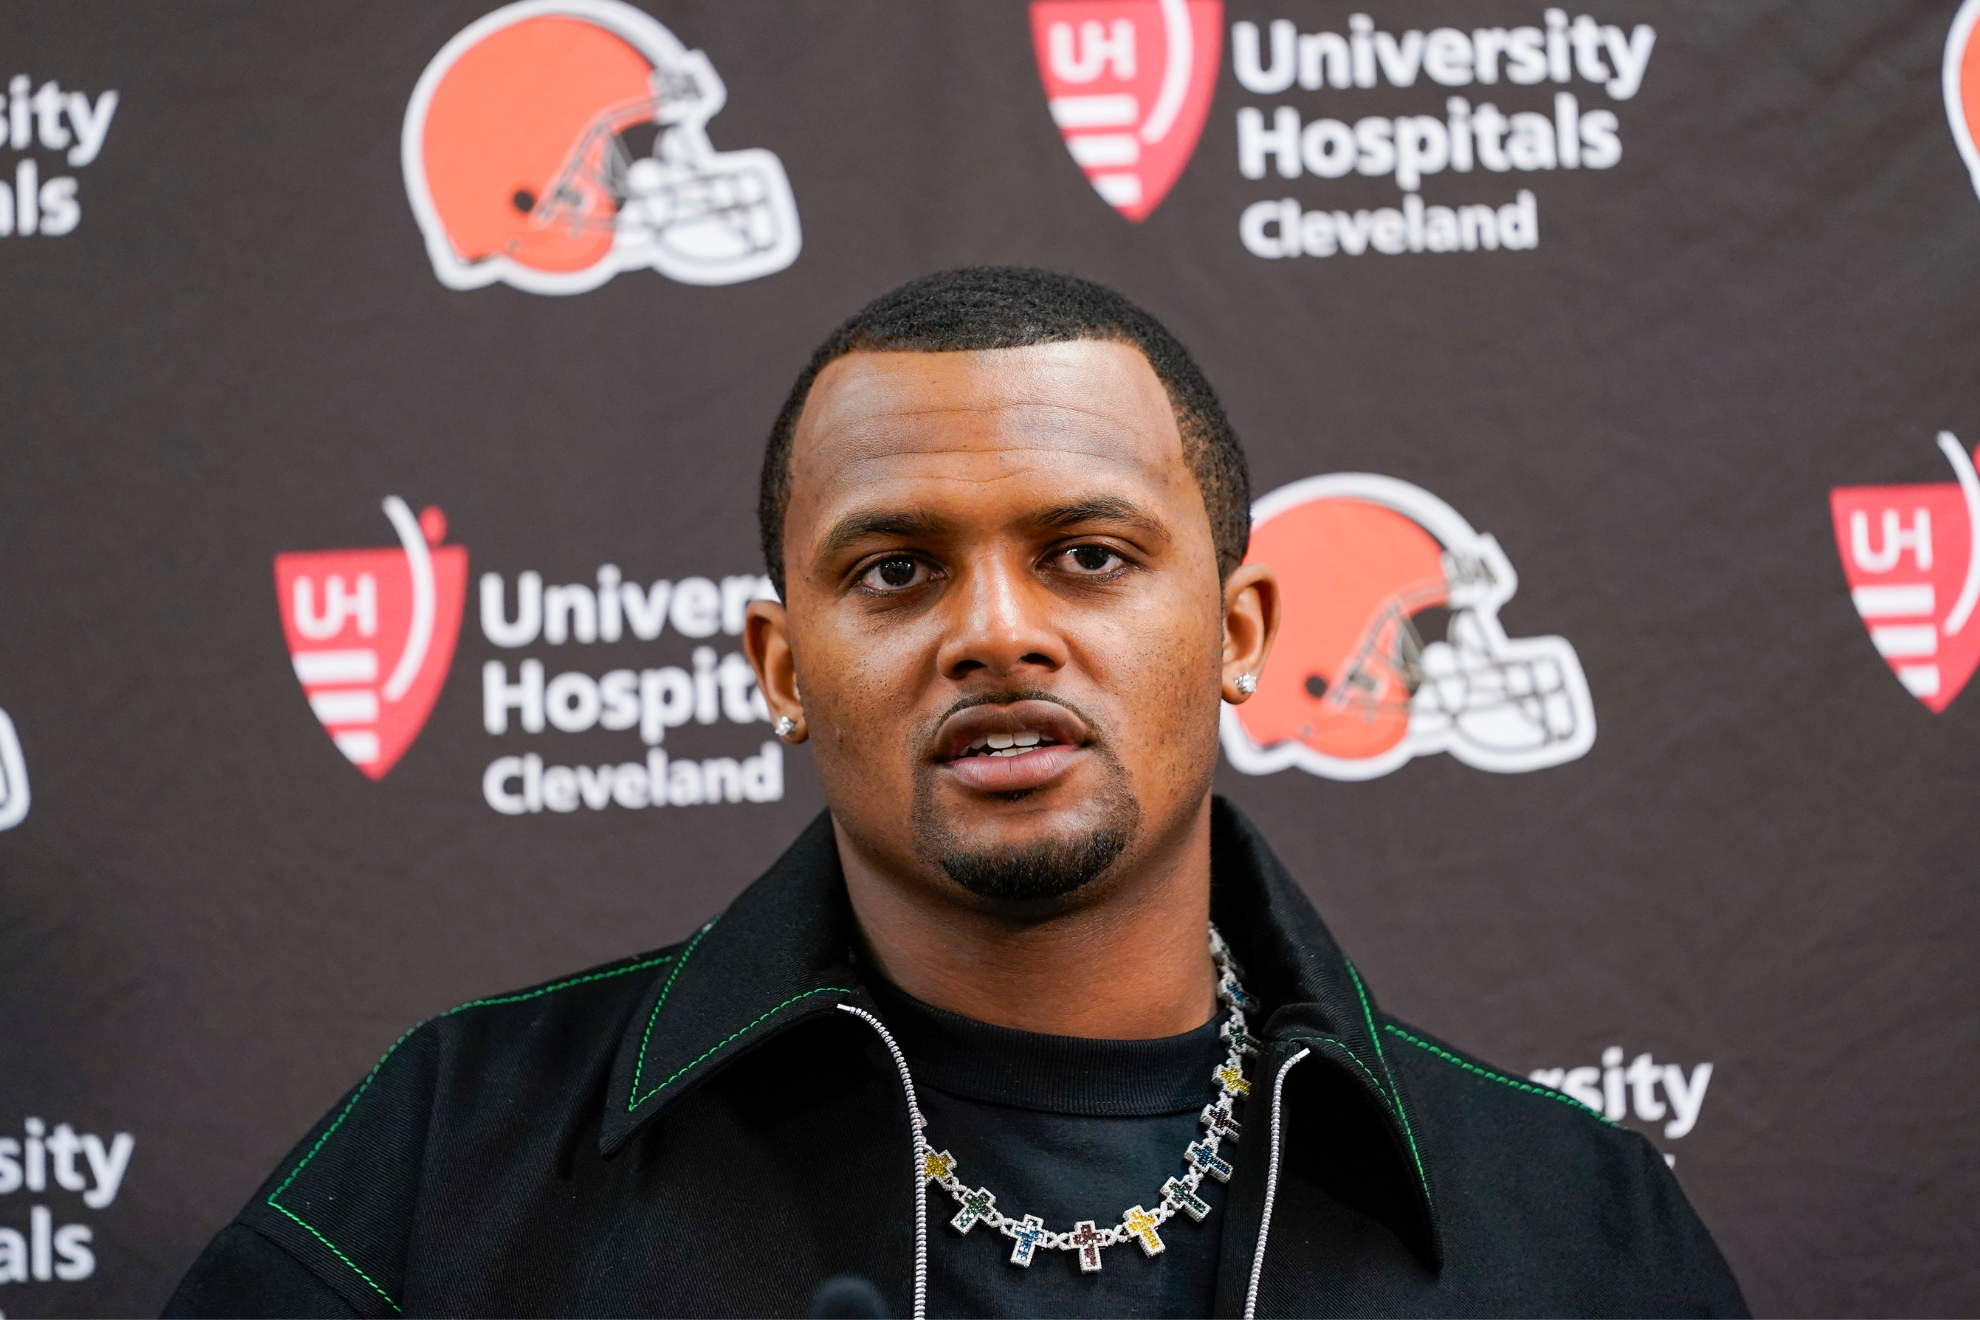 Watson won five of his six starts for the Browns this season.